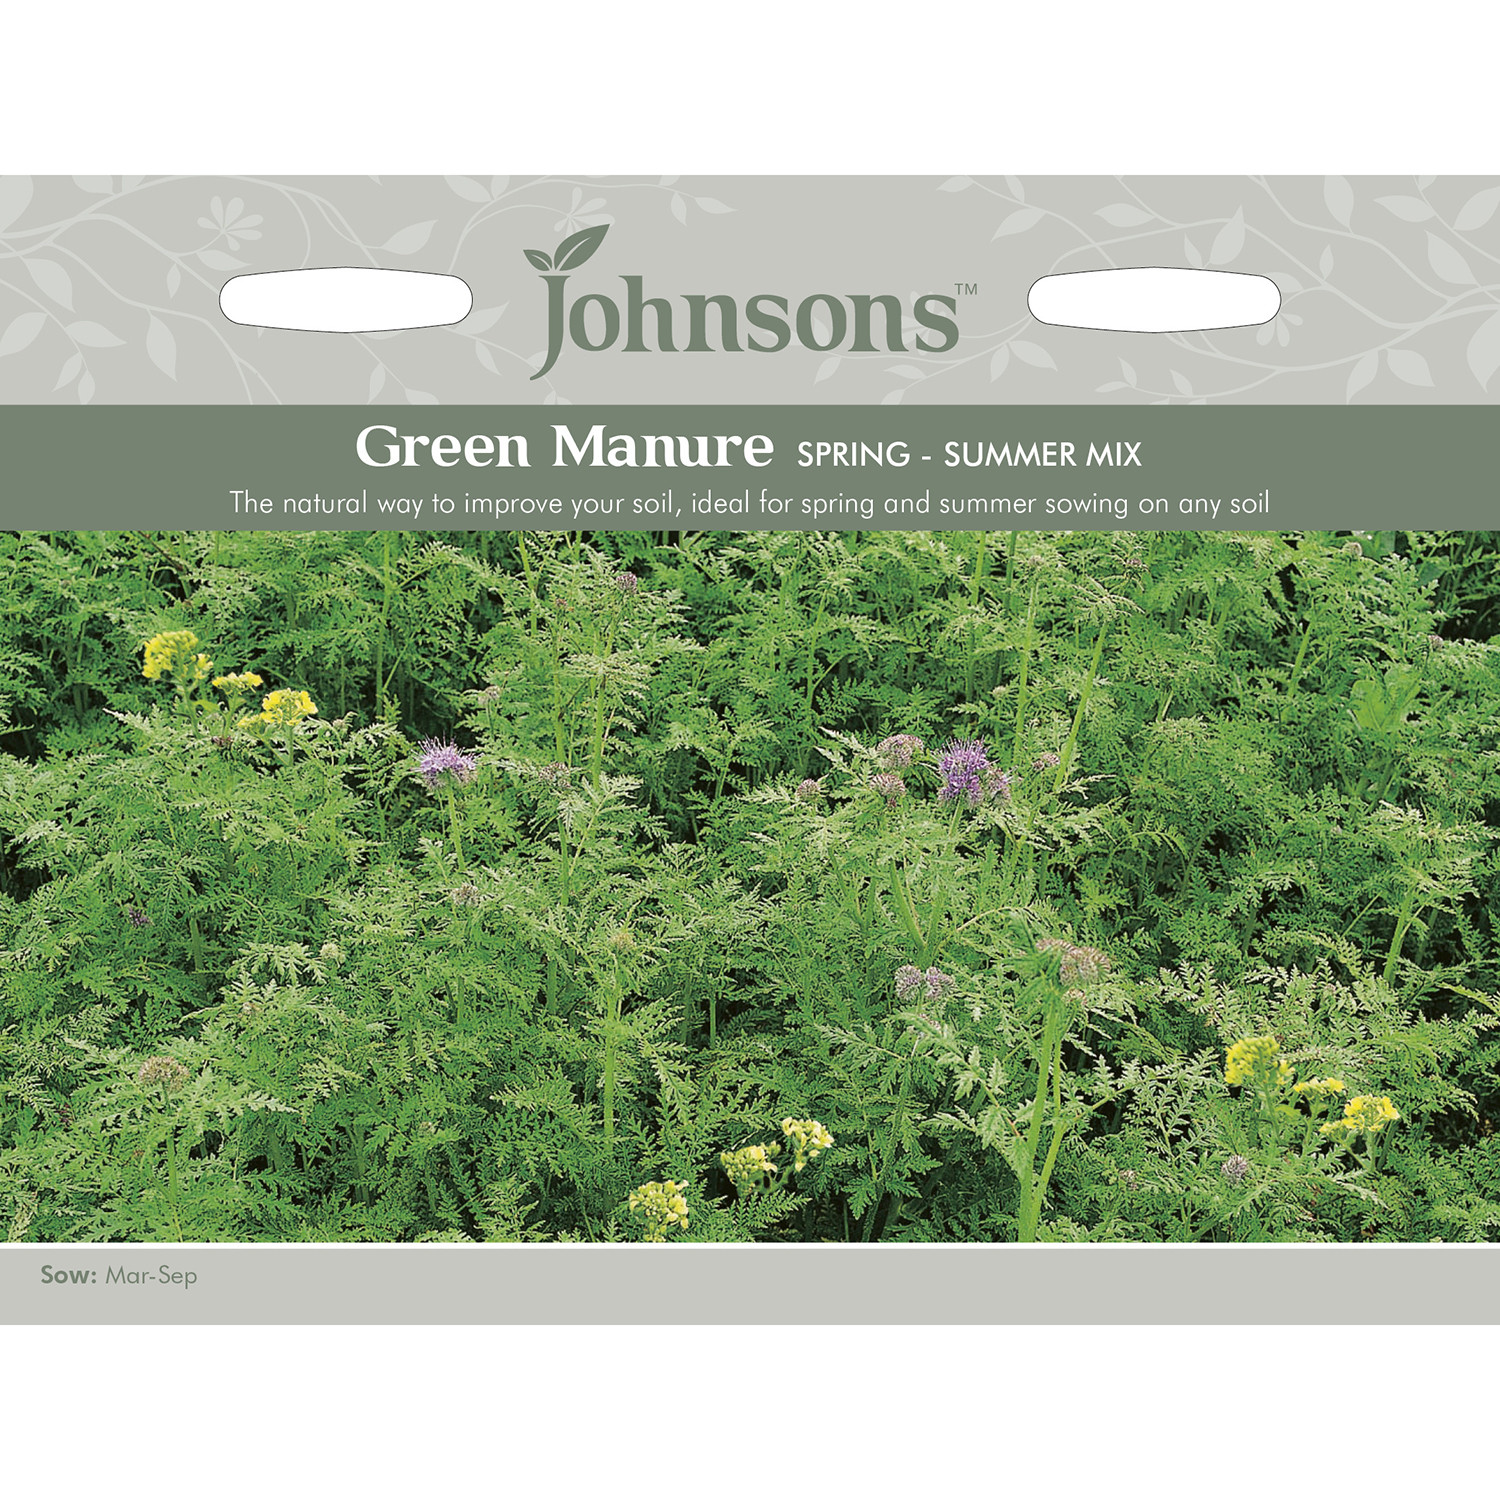 Pack of Summer Mix Green Manure Spring Image 1